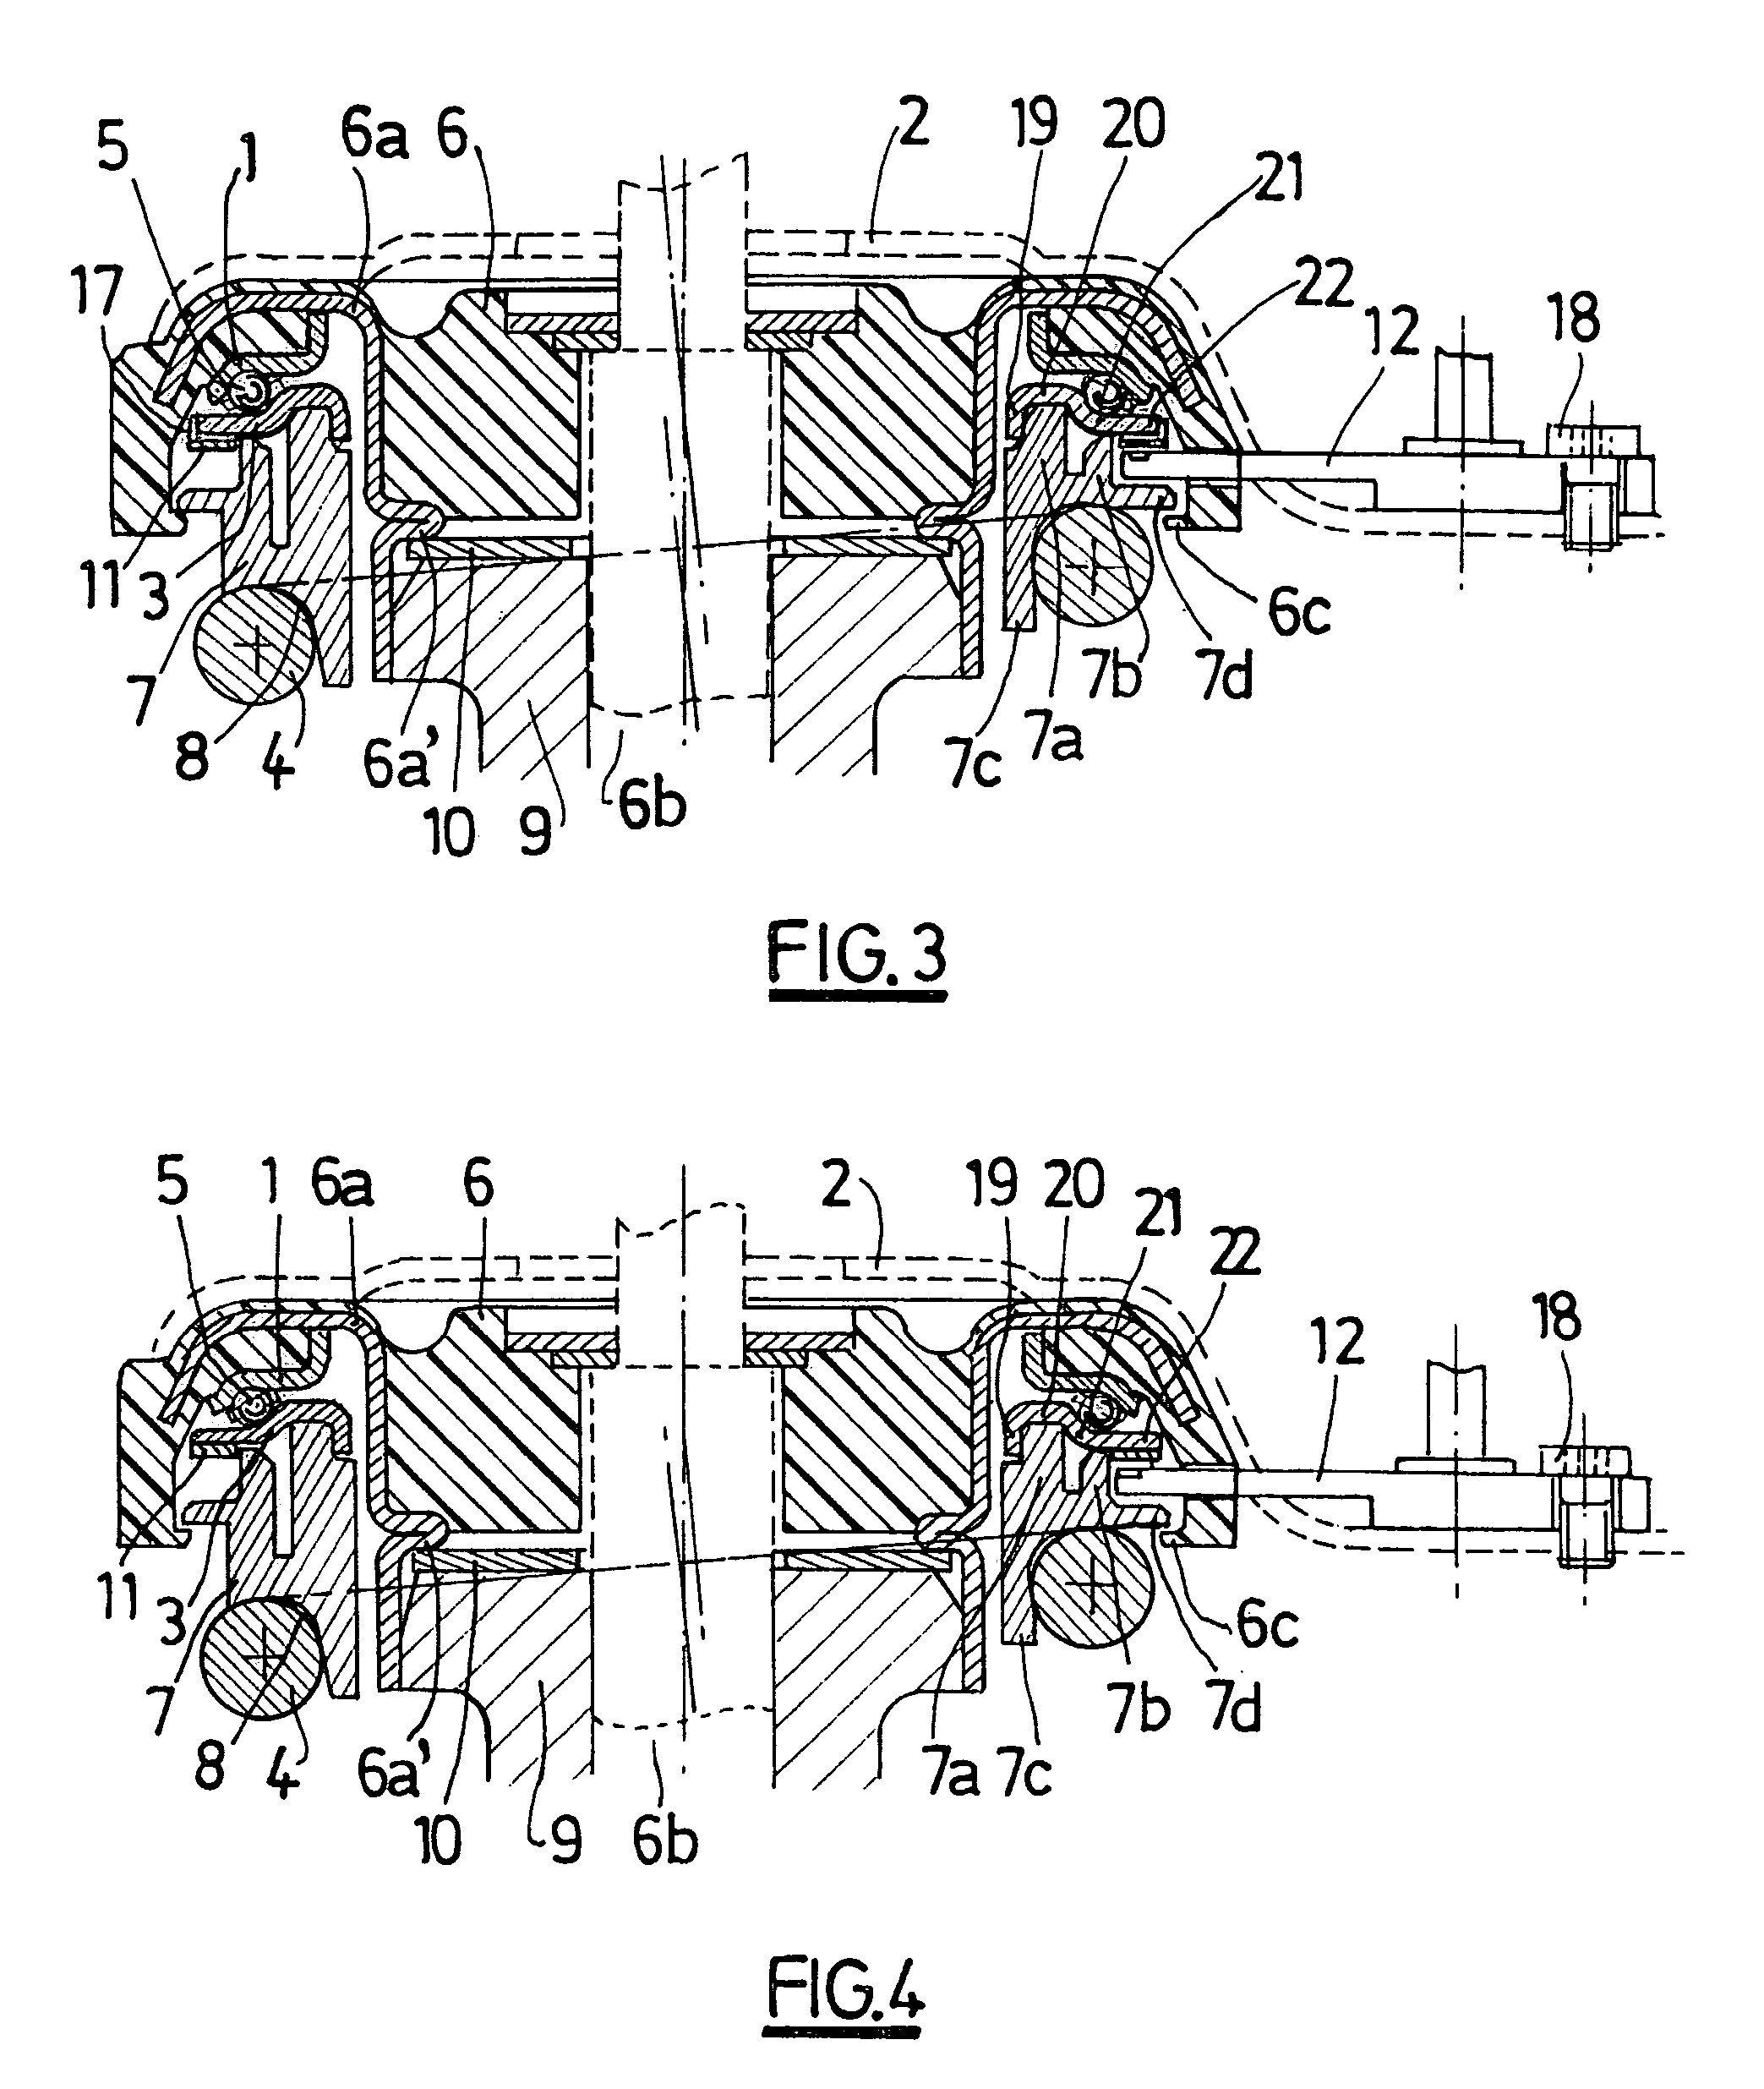 Rotating instrumented suspension stop for measuring vertical forces